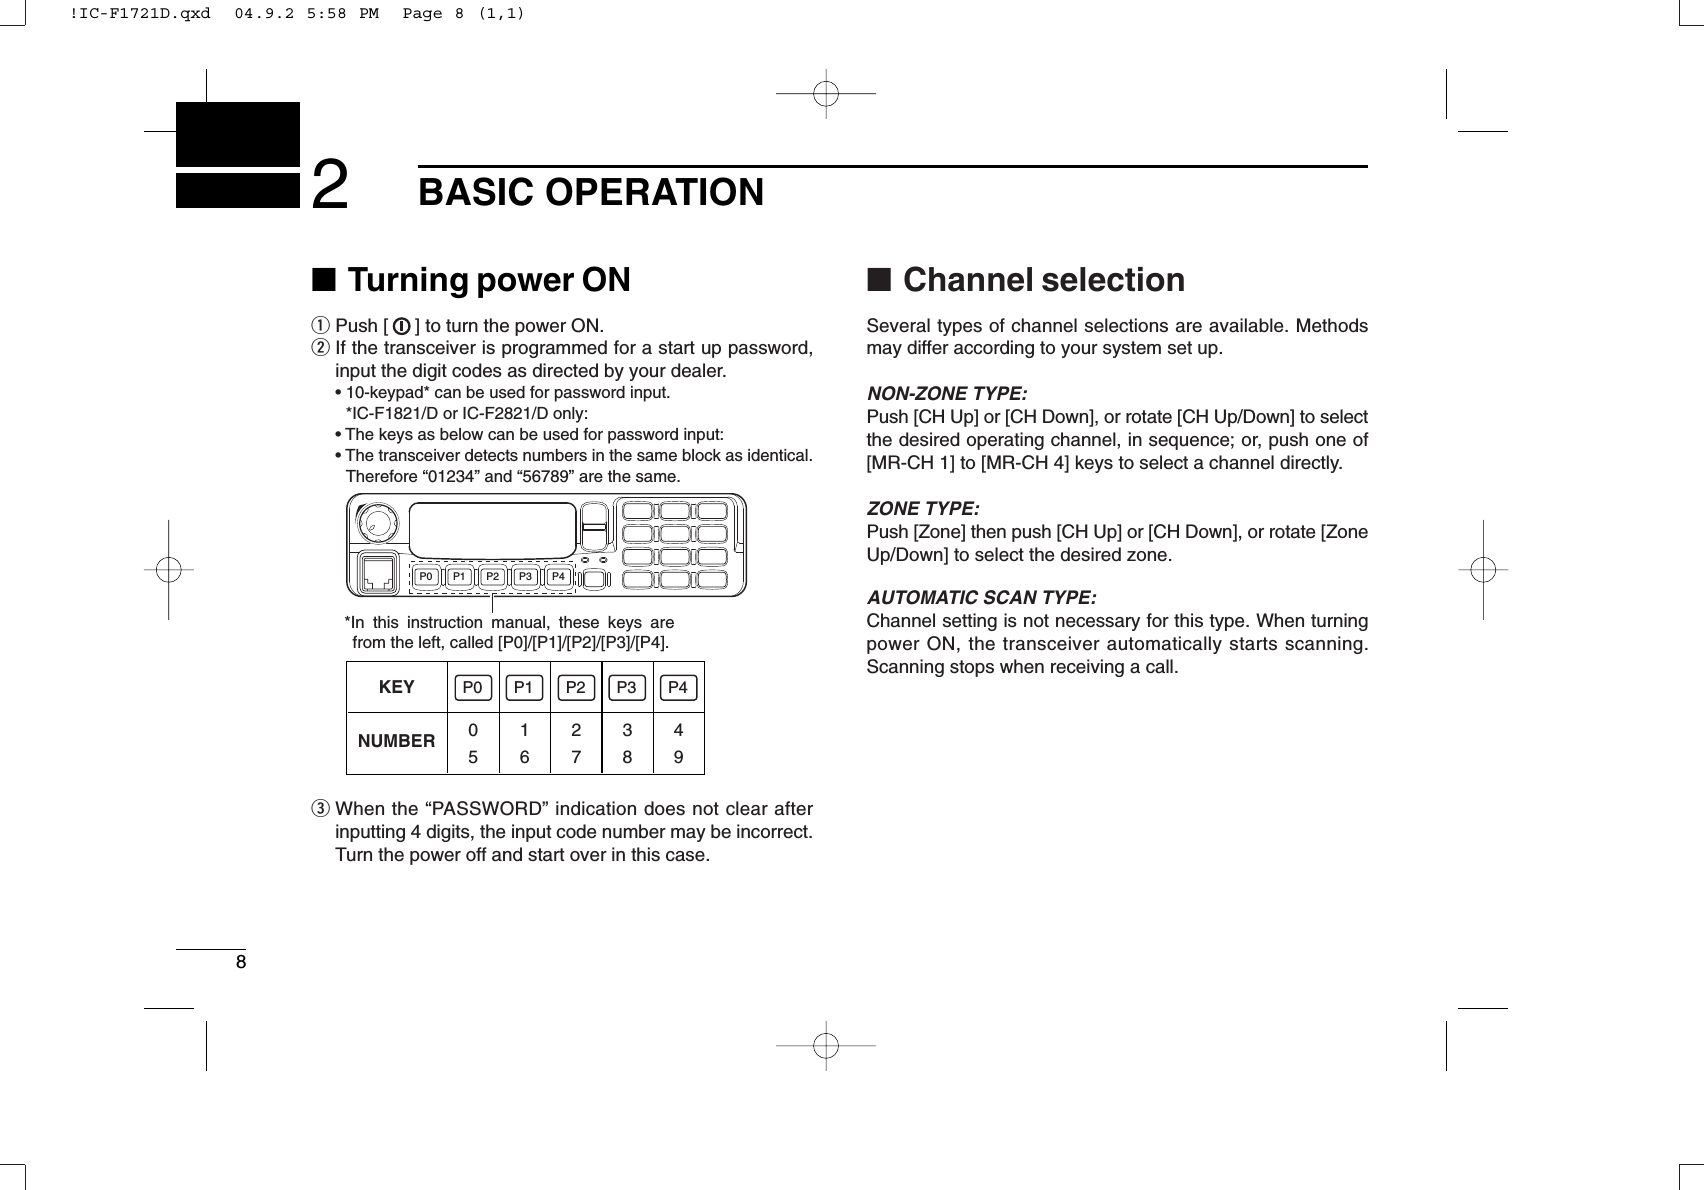 82BASIC OPERATION■Turning power ONqPush [ ] to turn the power ON.wIf the transceiver is programmed for a start up password,input the digit codes as directed by your dealer.• 10-keypad* can be used for password input.*IC-F1821/D or IC-F2821/D only:• The keys as below can be used for password input:• The transceiver detects numbers in the same block as identical.Therefore “01234” and “56789” are the same.eWhen the “PASSWORD” indication does not clear afterinputting 4 digits, the input code number may be incorrect.Turn the power off and start over in this case.■Channel selectionSeveral types of channel selections are available. Methodsmay differ according to your system set up.NON-ZONE TYPE:Push [CH Up] or [CH Down], or rotate [CH Up/Down] to selectthe desired operating channel, in sequence; or, push one of[MR-CH 1] to [MR-CH 4] keys to select a channel directly.ZONE TYPE:Push [Zone] then push [CH Up] or [CH Down], or rotate [ZoneUp/Down] to select the desired zone.AUTOMATIC SCAN TYPE:Channel setting is not necessary for this type. When turningpower ON, the transceiver automatically starts scanning.Scanning stops when receiving a call.KEYNUMBER 0549382716P0 P4P3P2P1P0 P4P3P2P1*In this instruction manual, these keys are from the left, called [P0]/[P1]/[P2]/[P3]/[P4].!IC-F1721D.qxd  04.9.2 5:58 PM  Page 8 (1,1)